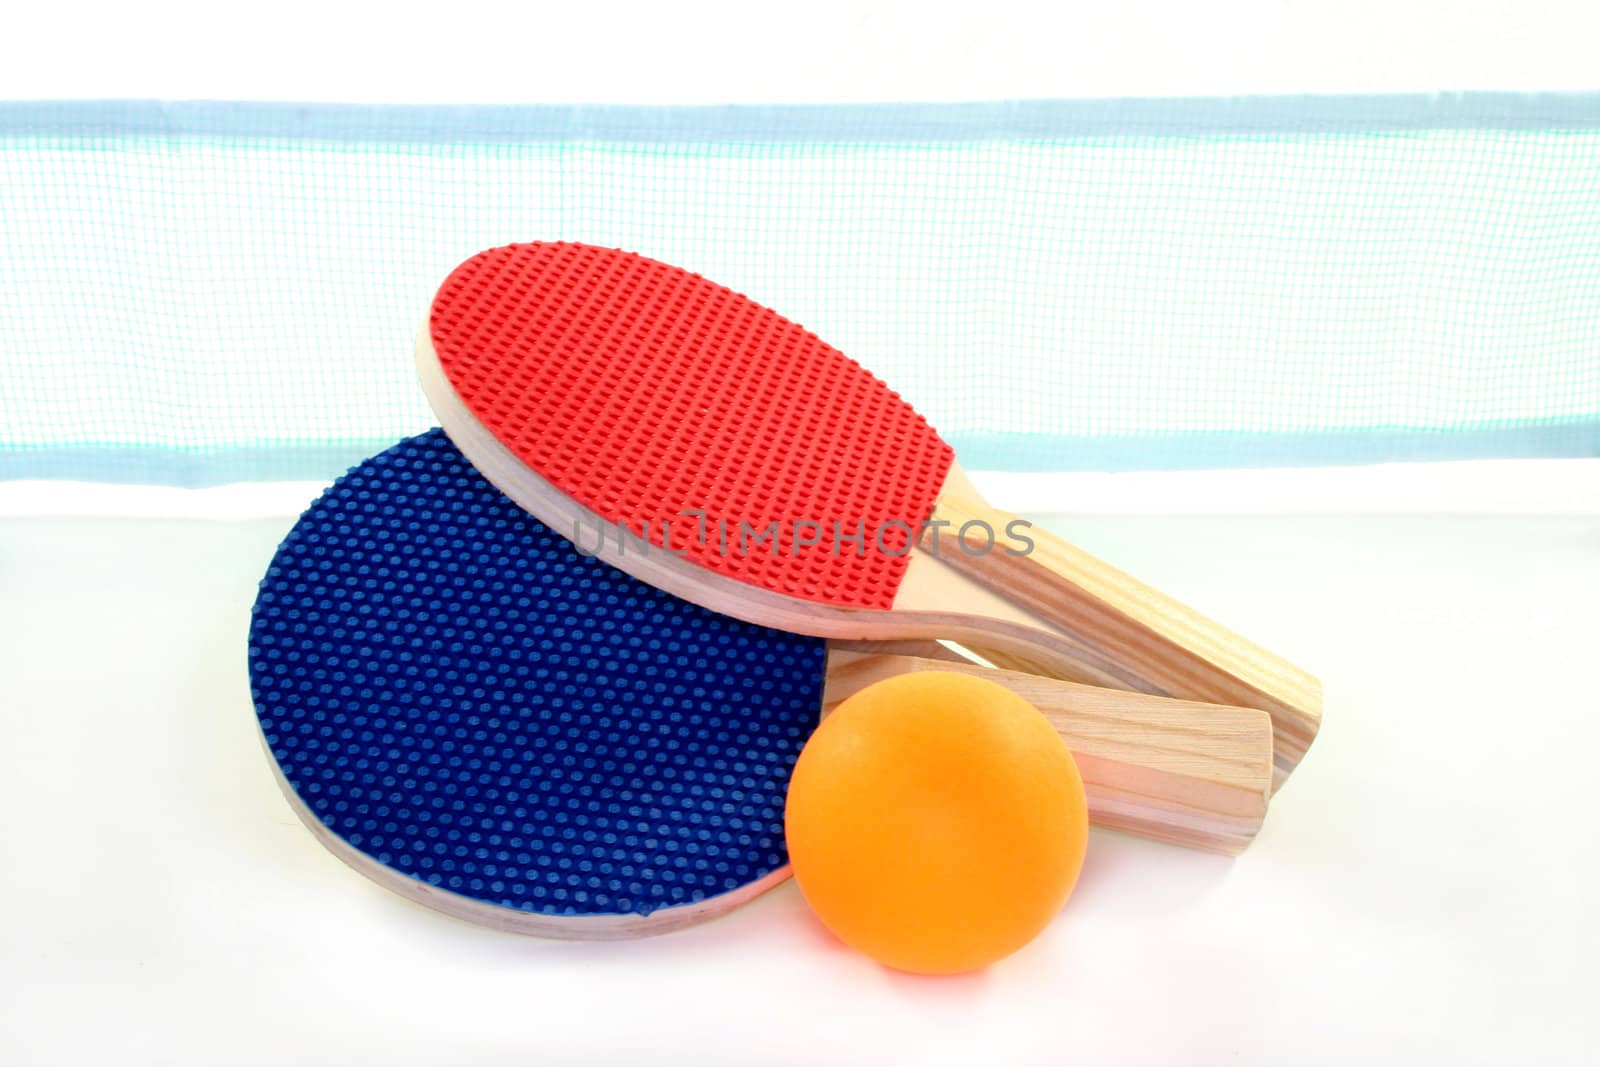 two table tennis bats, net and ball on a white background